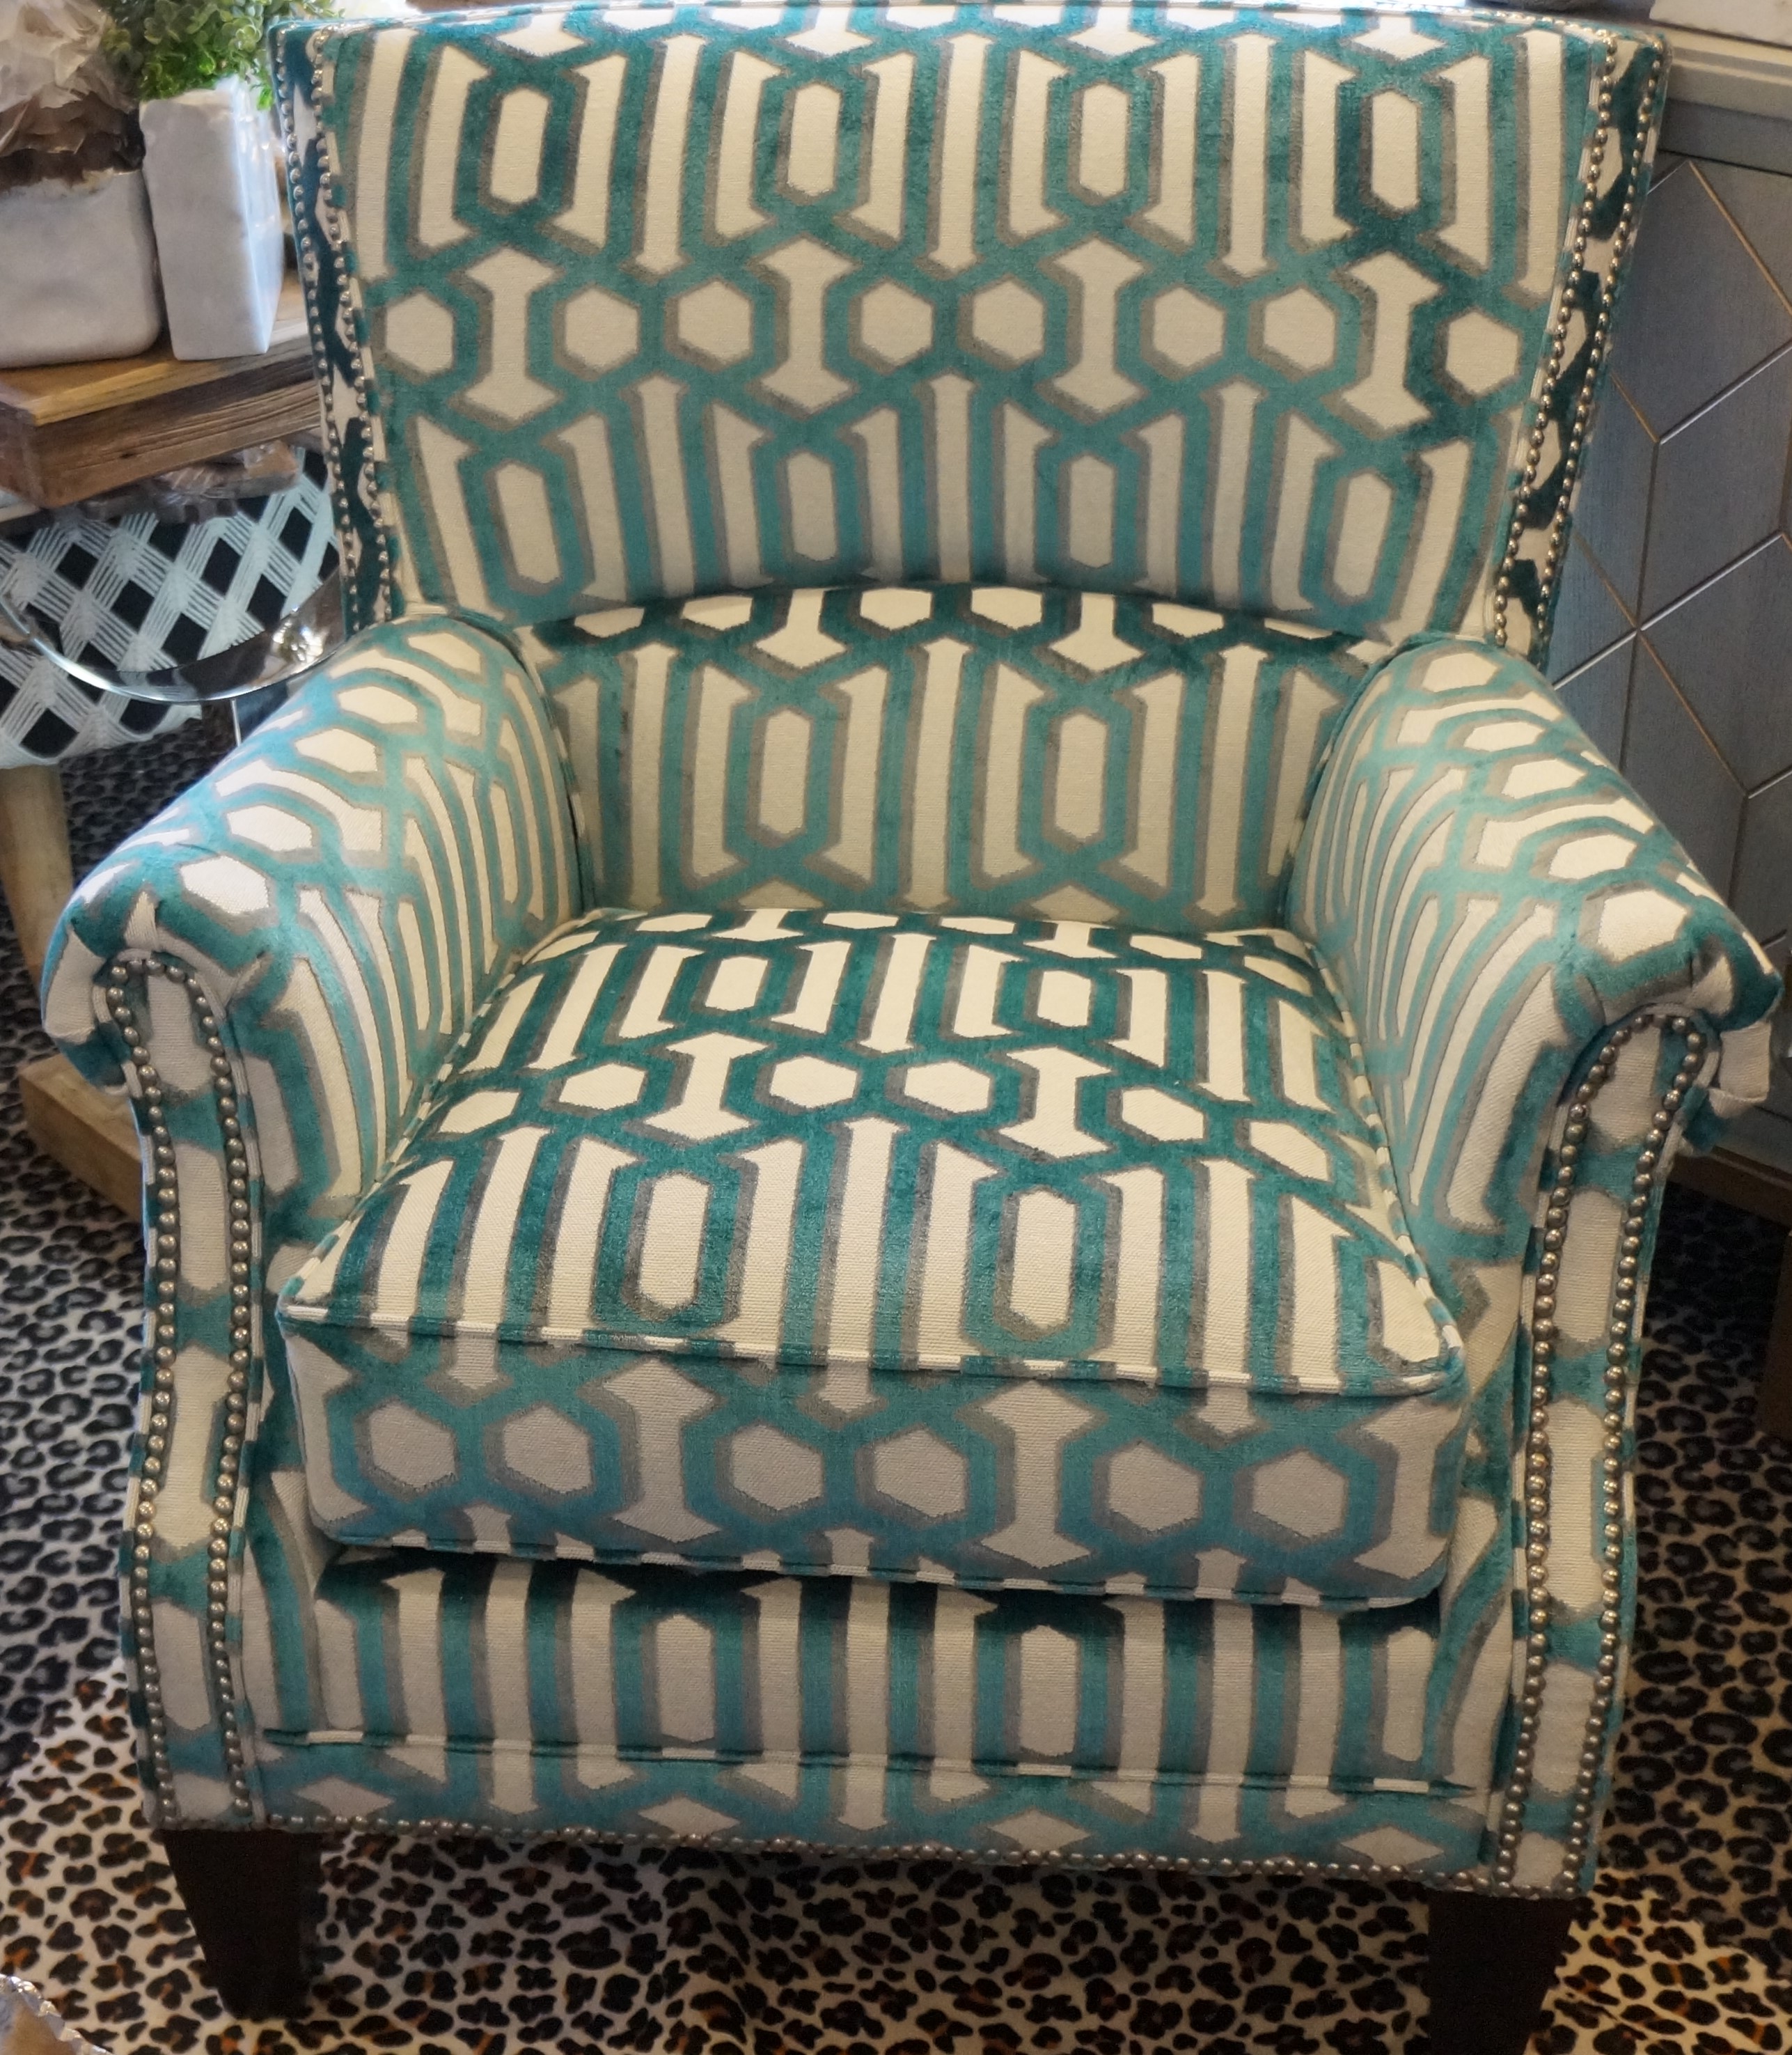 Flocked Turquoise and Gray Geometric Accent Chair Nuance